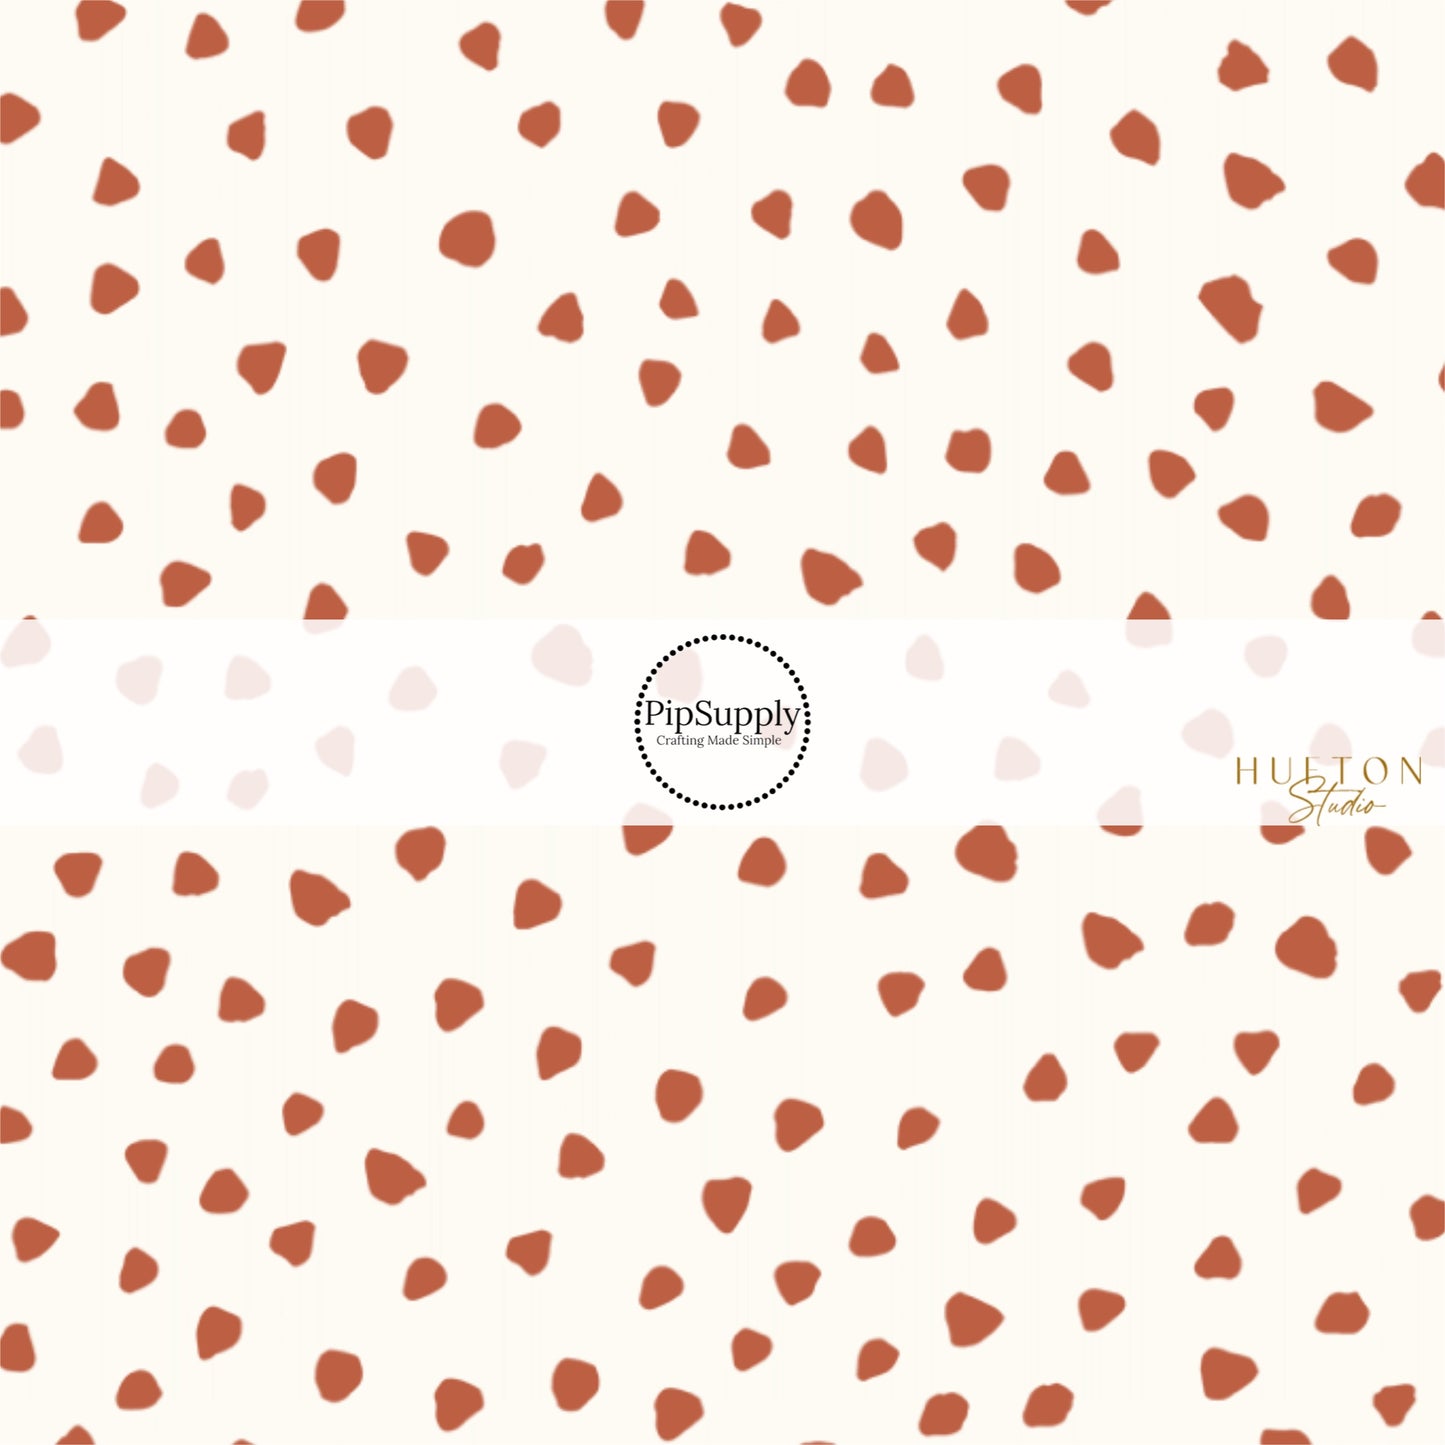 These speckled themed fabric by the yard features small brown speckled dots on ivory. This fun dotted themed fabric can be used for all your sewing and crafting needs! 